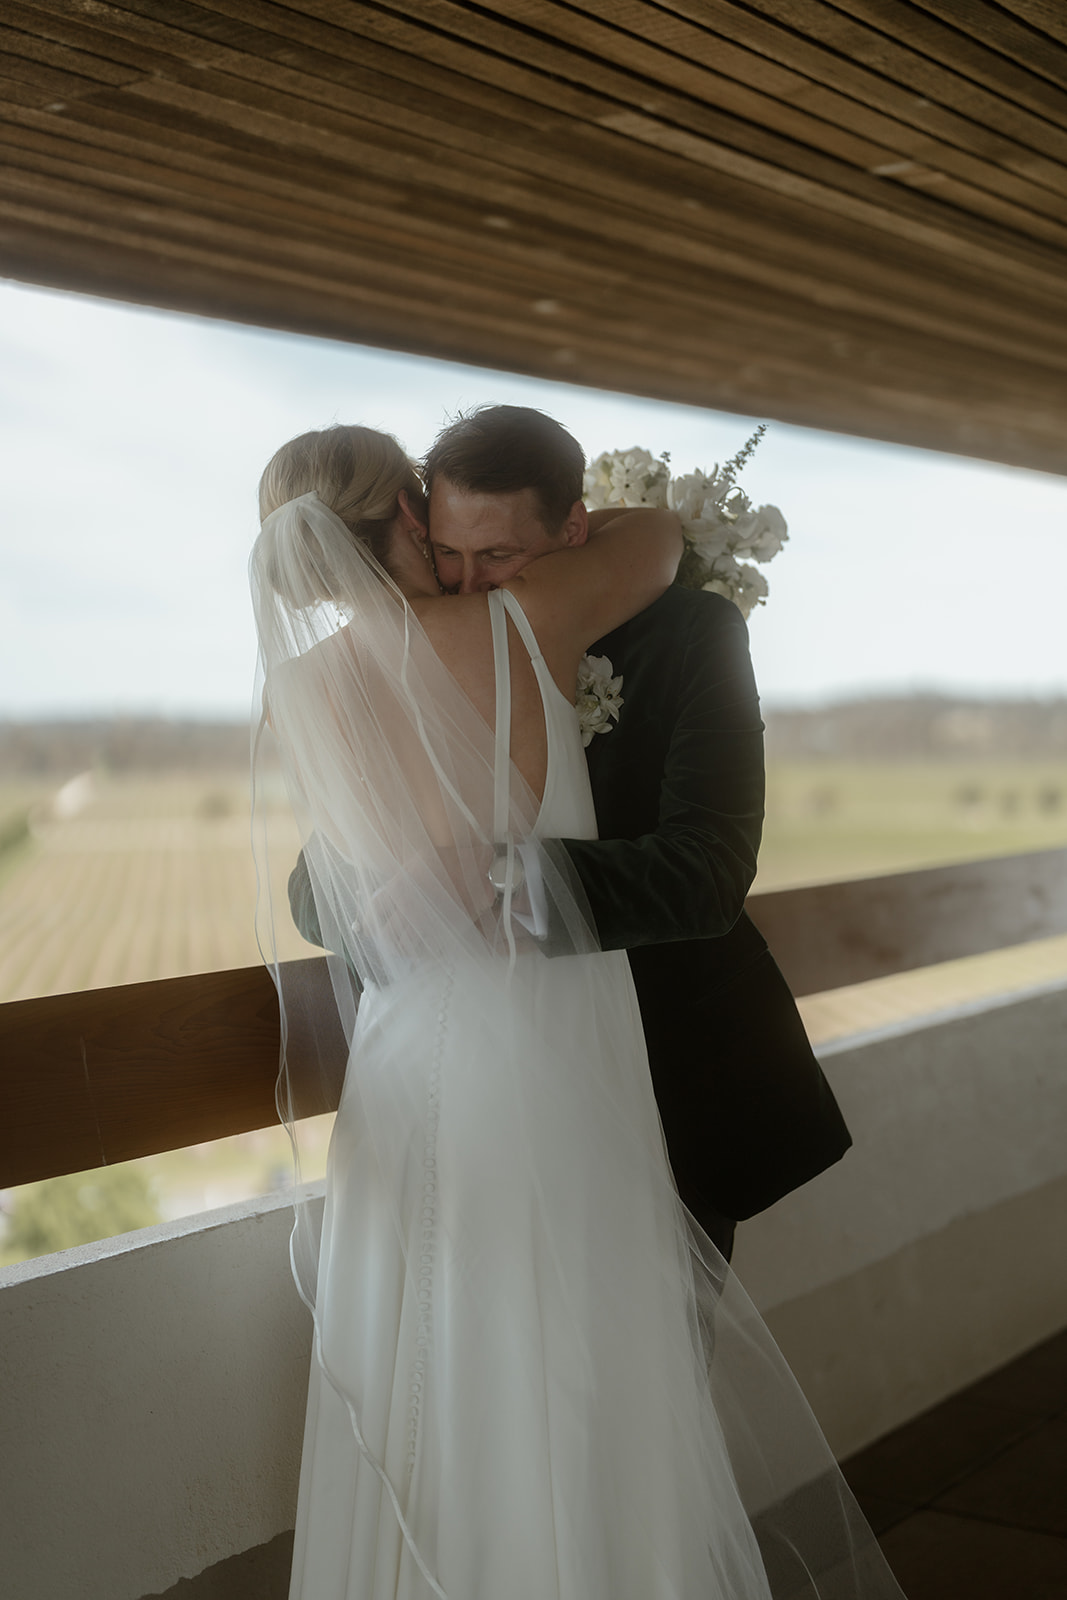 Zoe and Nathan sharing an emotional hug during there first look at Mitchelton winery wedding venue